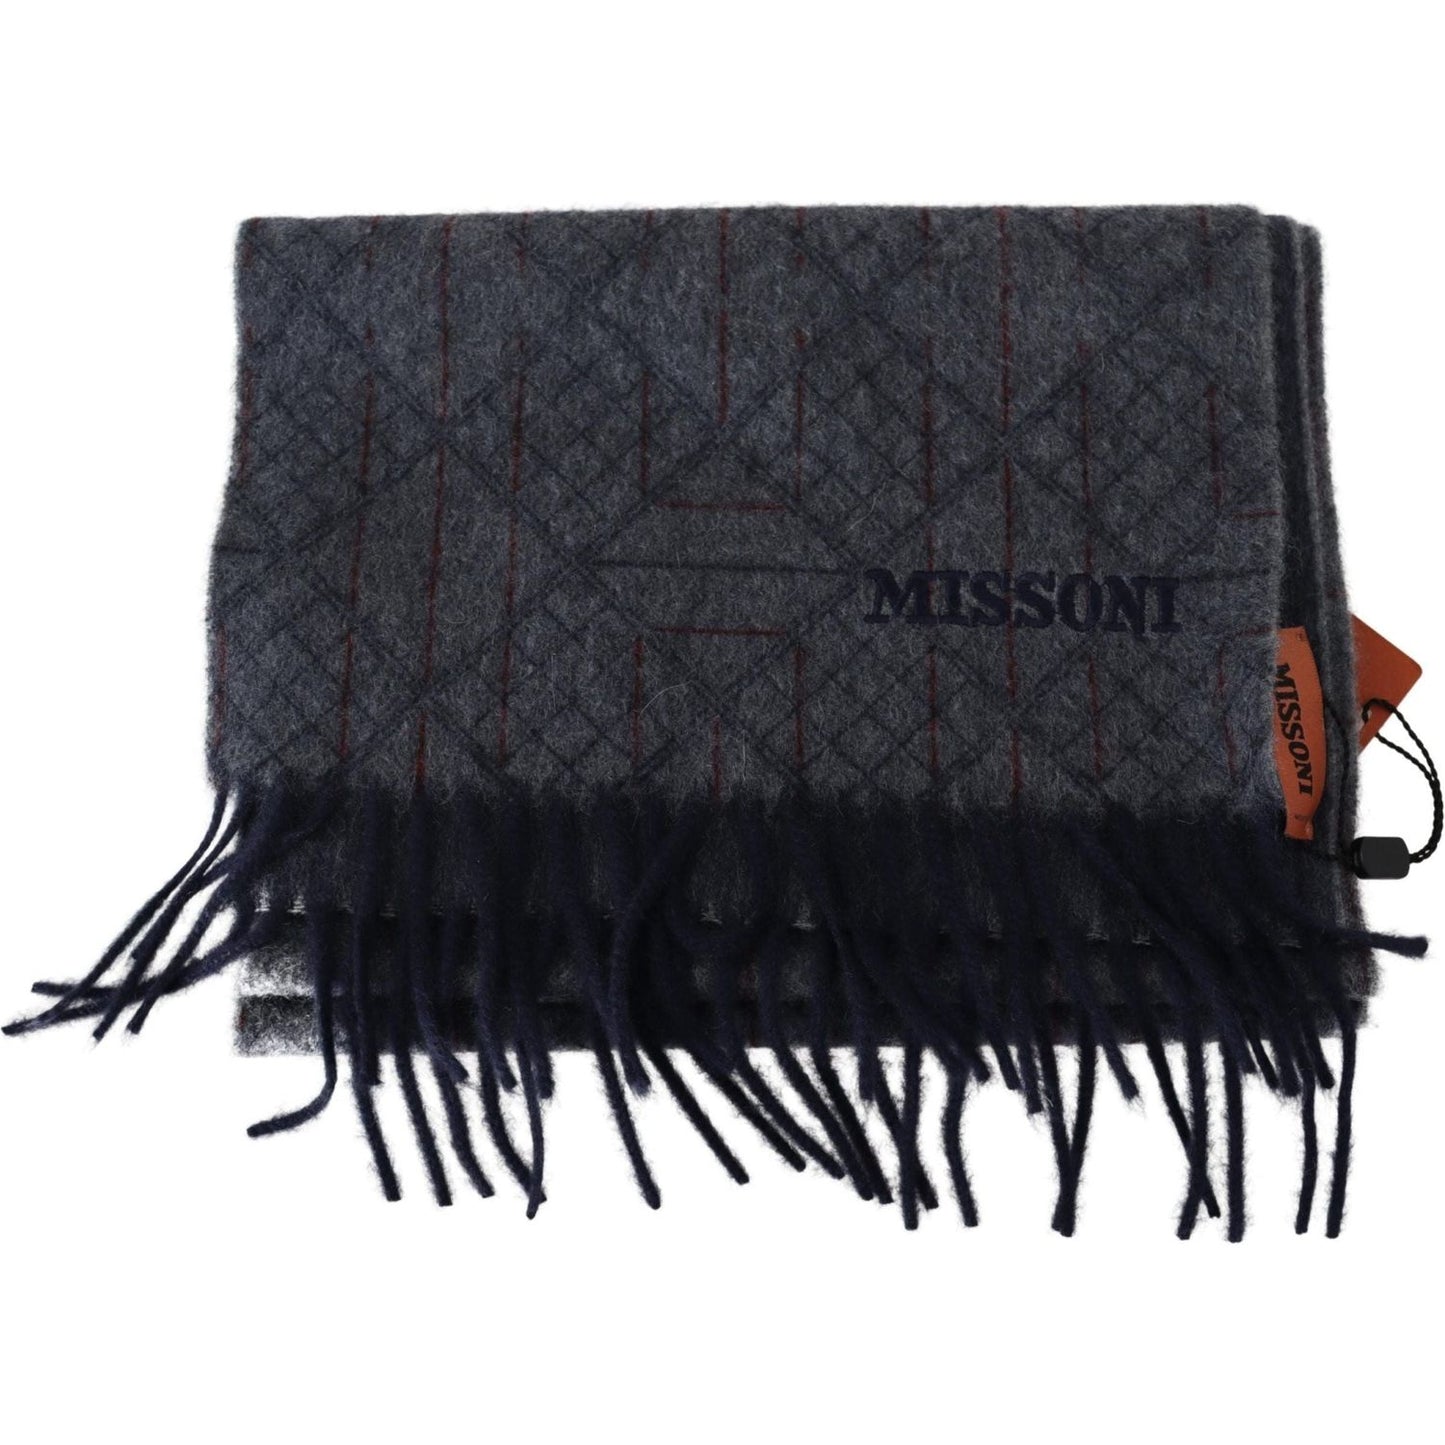 Elegant Cashmere Patterned Scarf with Logo Embroidery